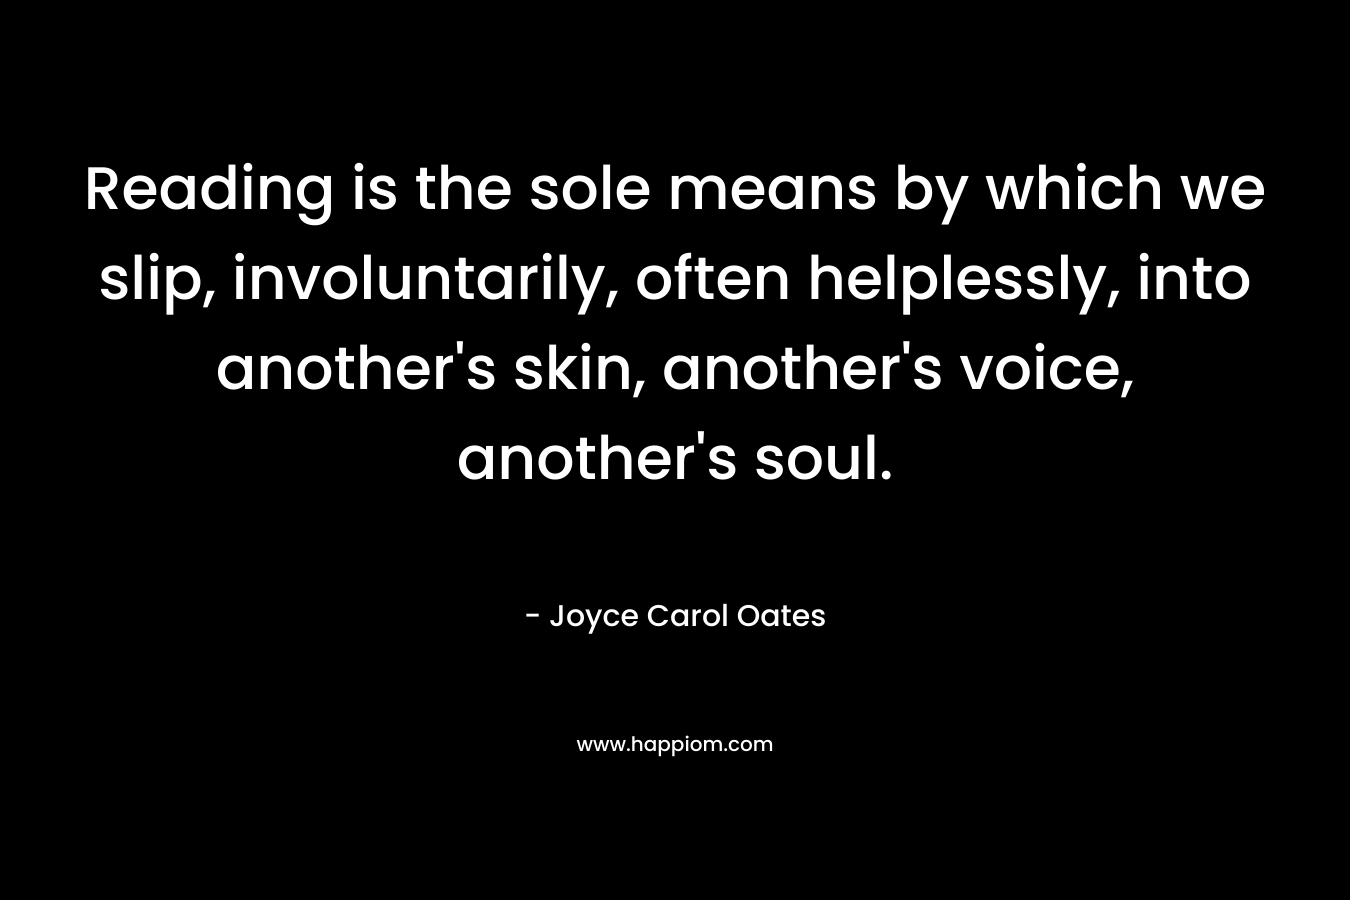 Reading is the sole means by which we slip, involuntarily, often helplessly, into another’s skin, another’s voice, another’s soul. – Joyce Carol Oates